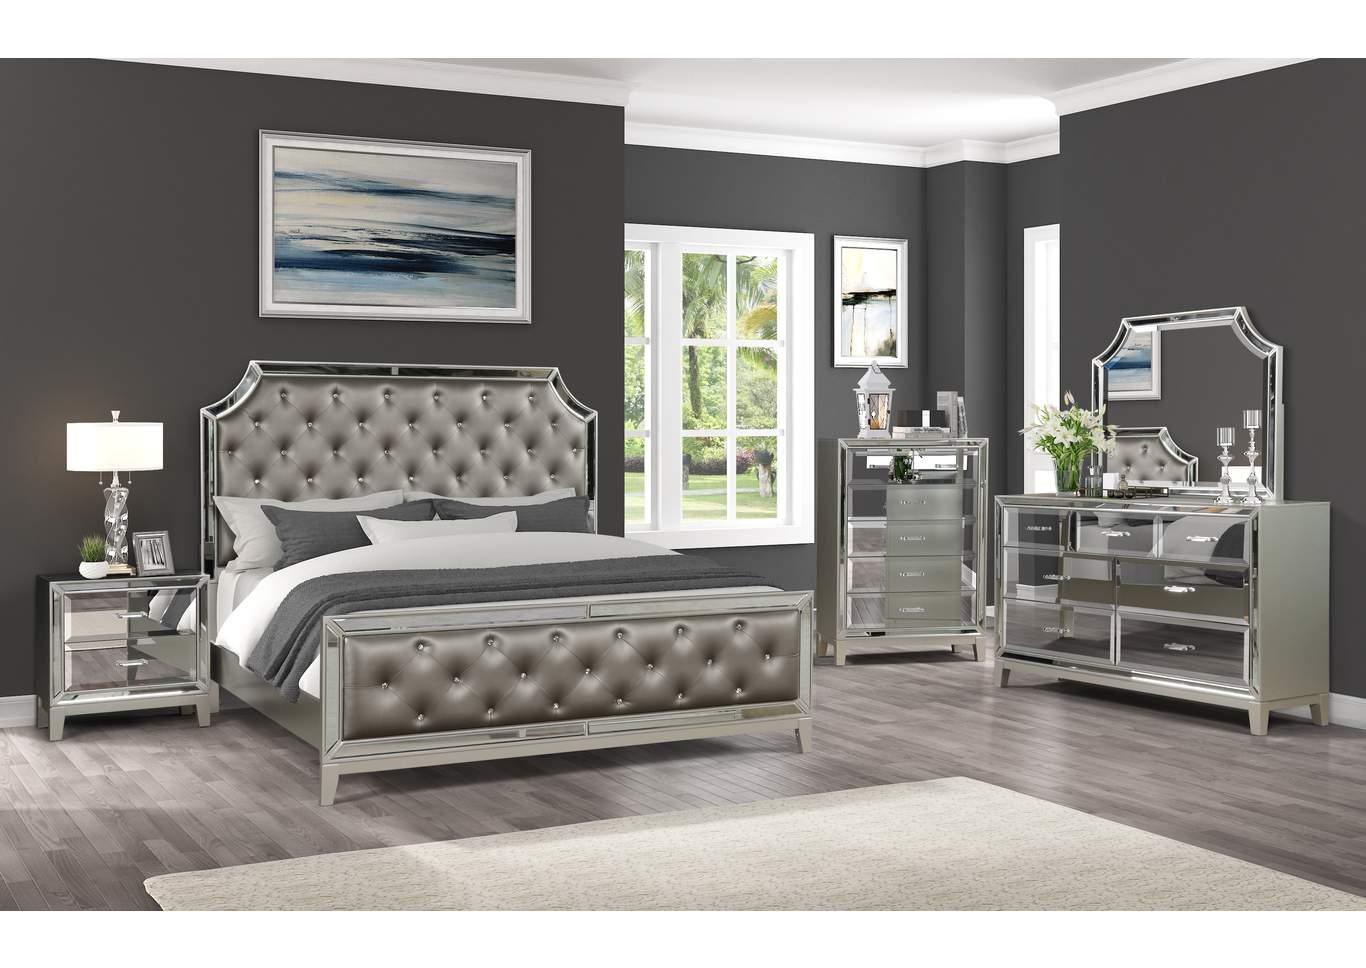 Contemporary, Modern Panel Bedroom Set HARMONY GHF-808857944962 in Silver, Gray Eco-Leather